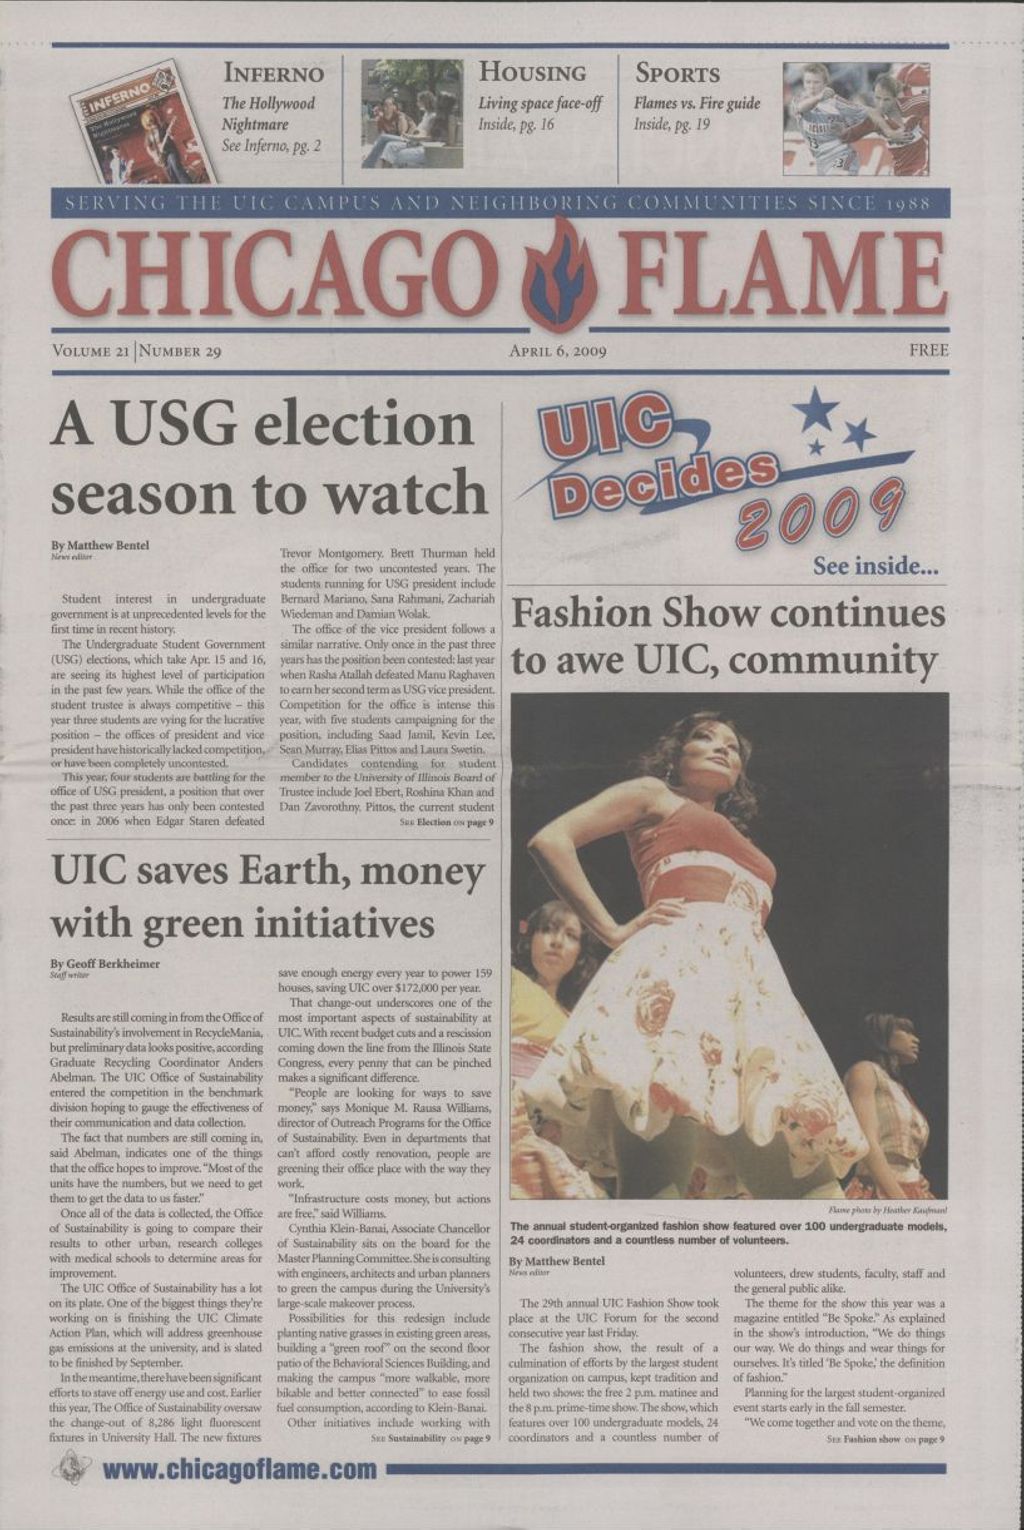 Chicago Flame (April 6, 2009)